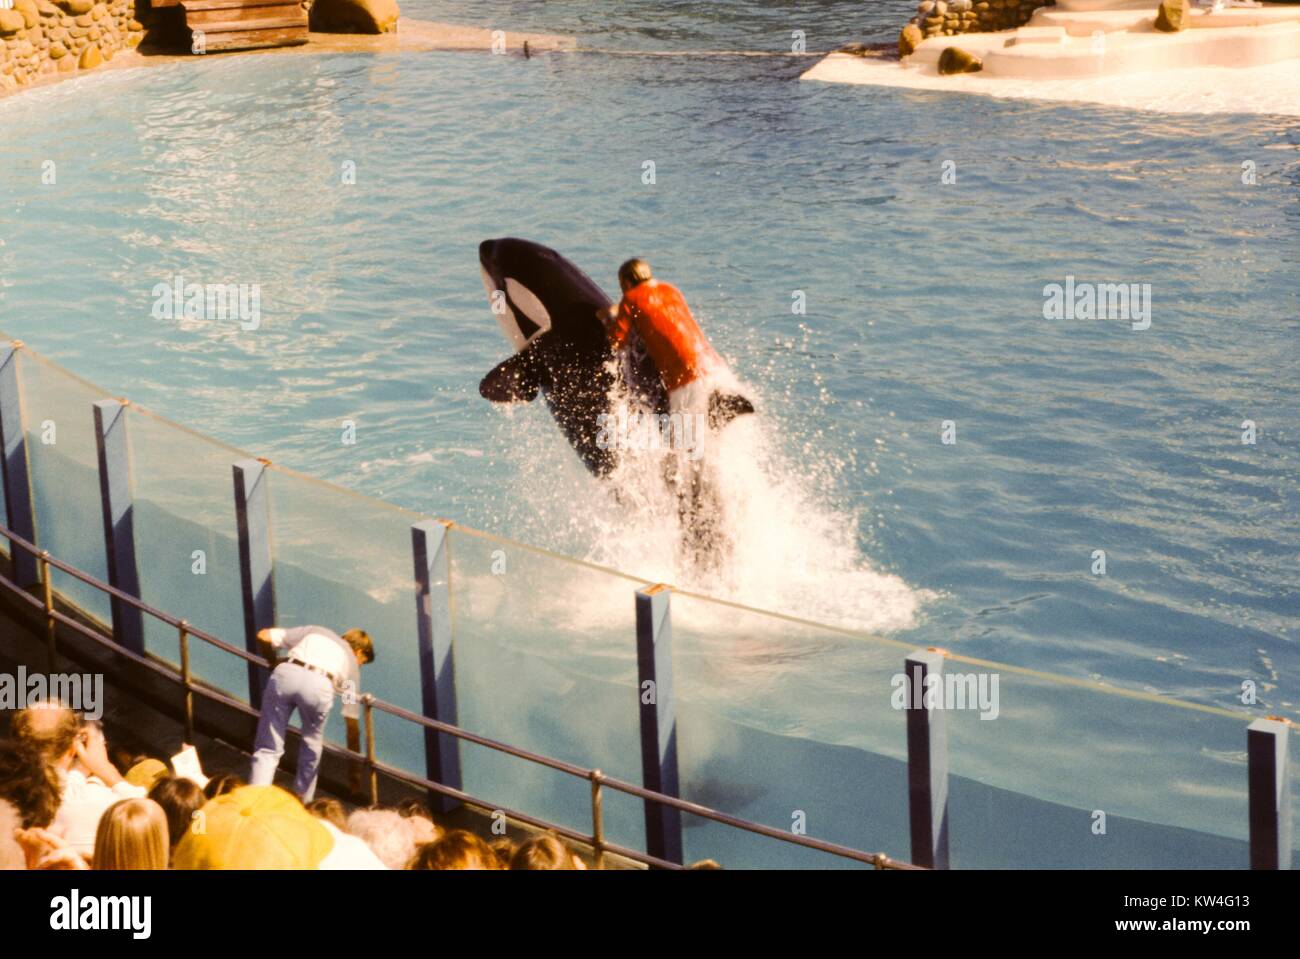 A trainer rides on the back of a killer whale as it leaps out of the water, at Sea World in San Diego, California, 1975. Stock Photo